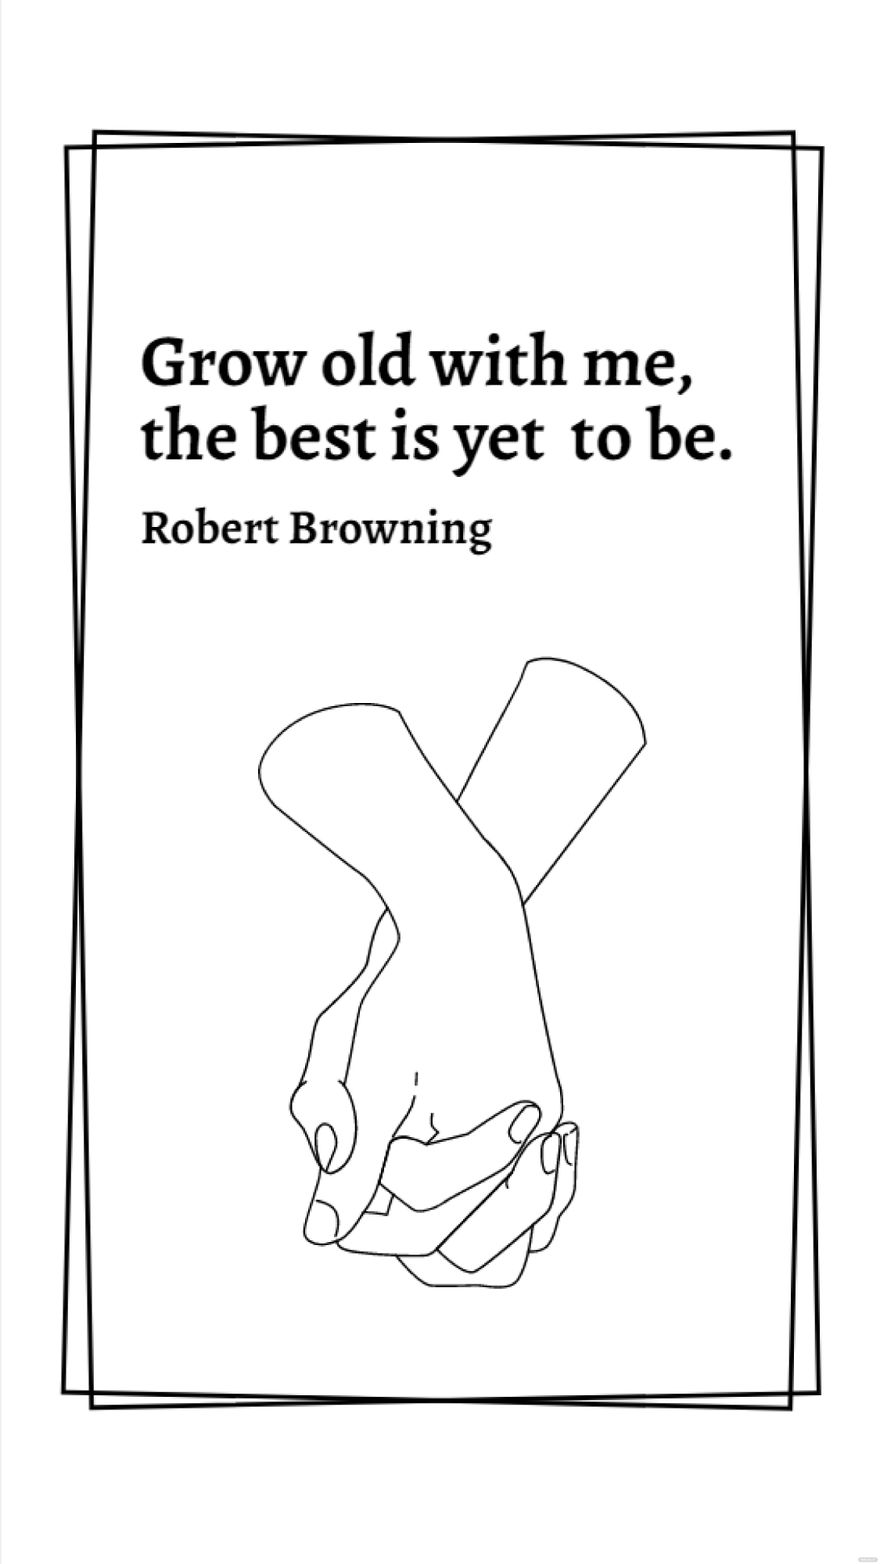 Free Robert Browning - Grow old with me, the best is yet to be.